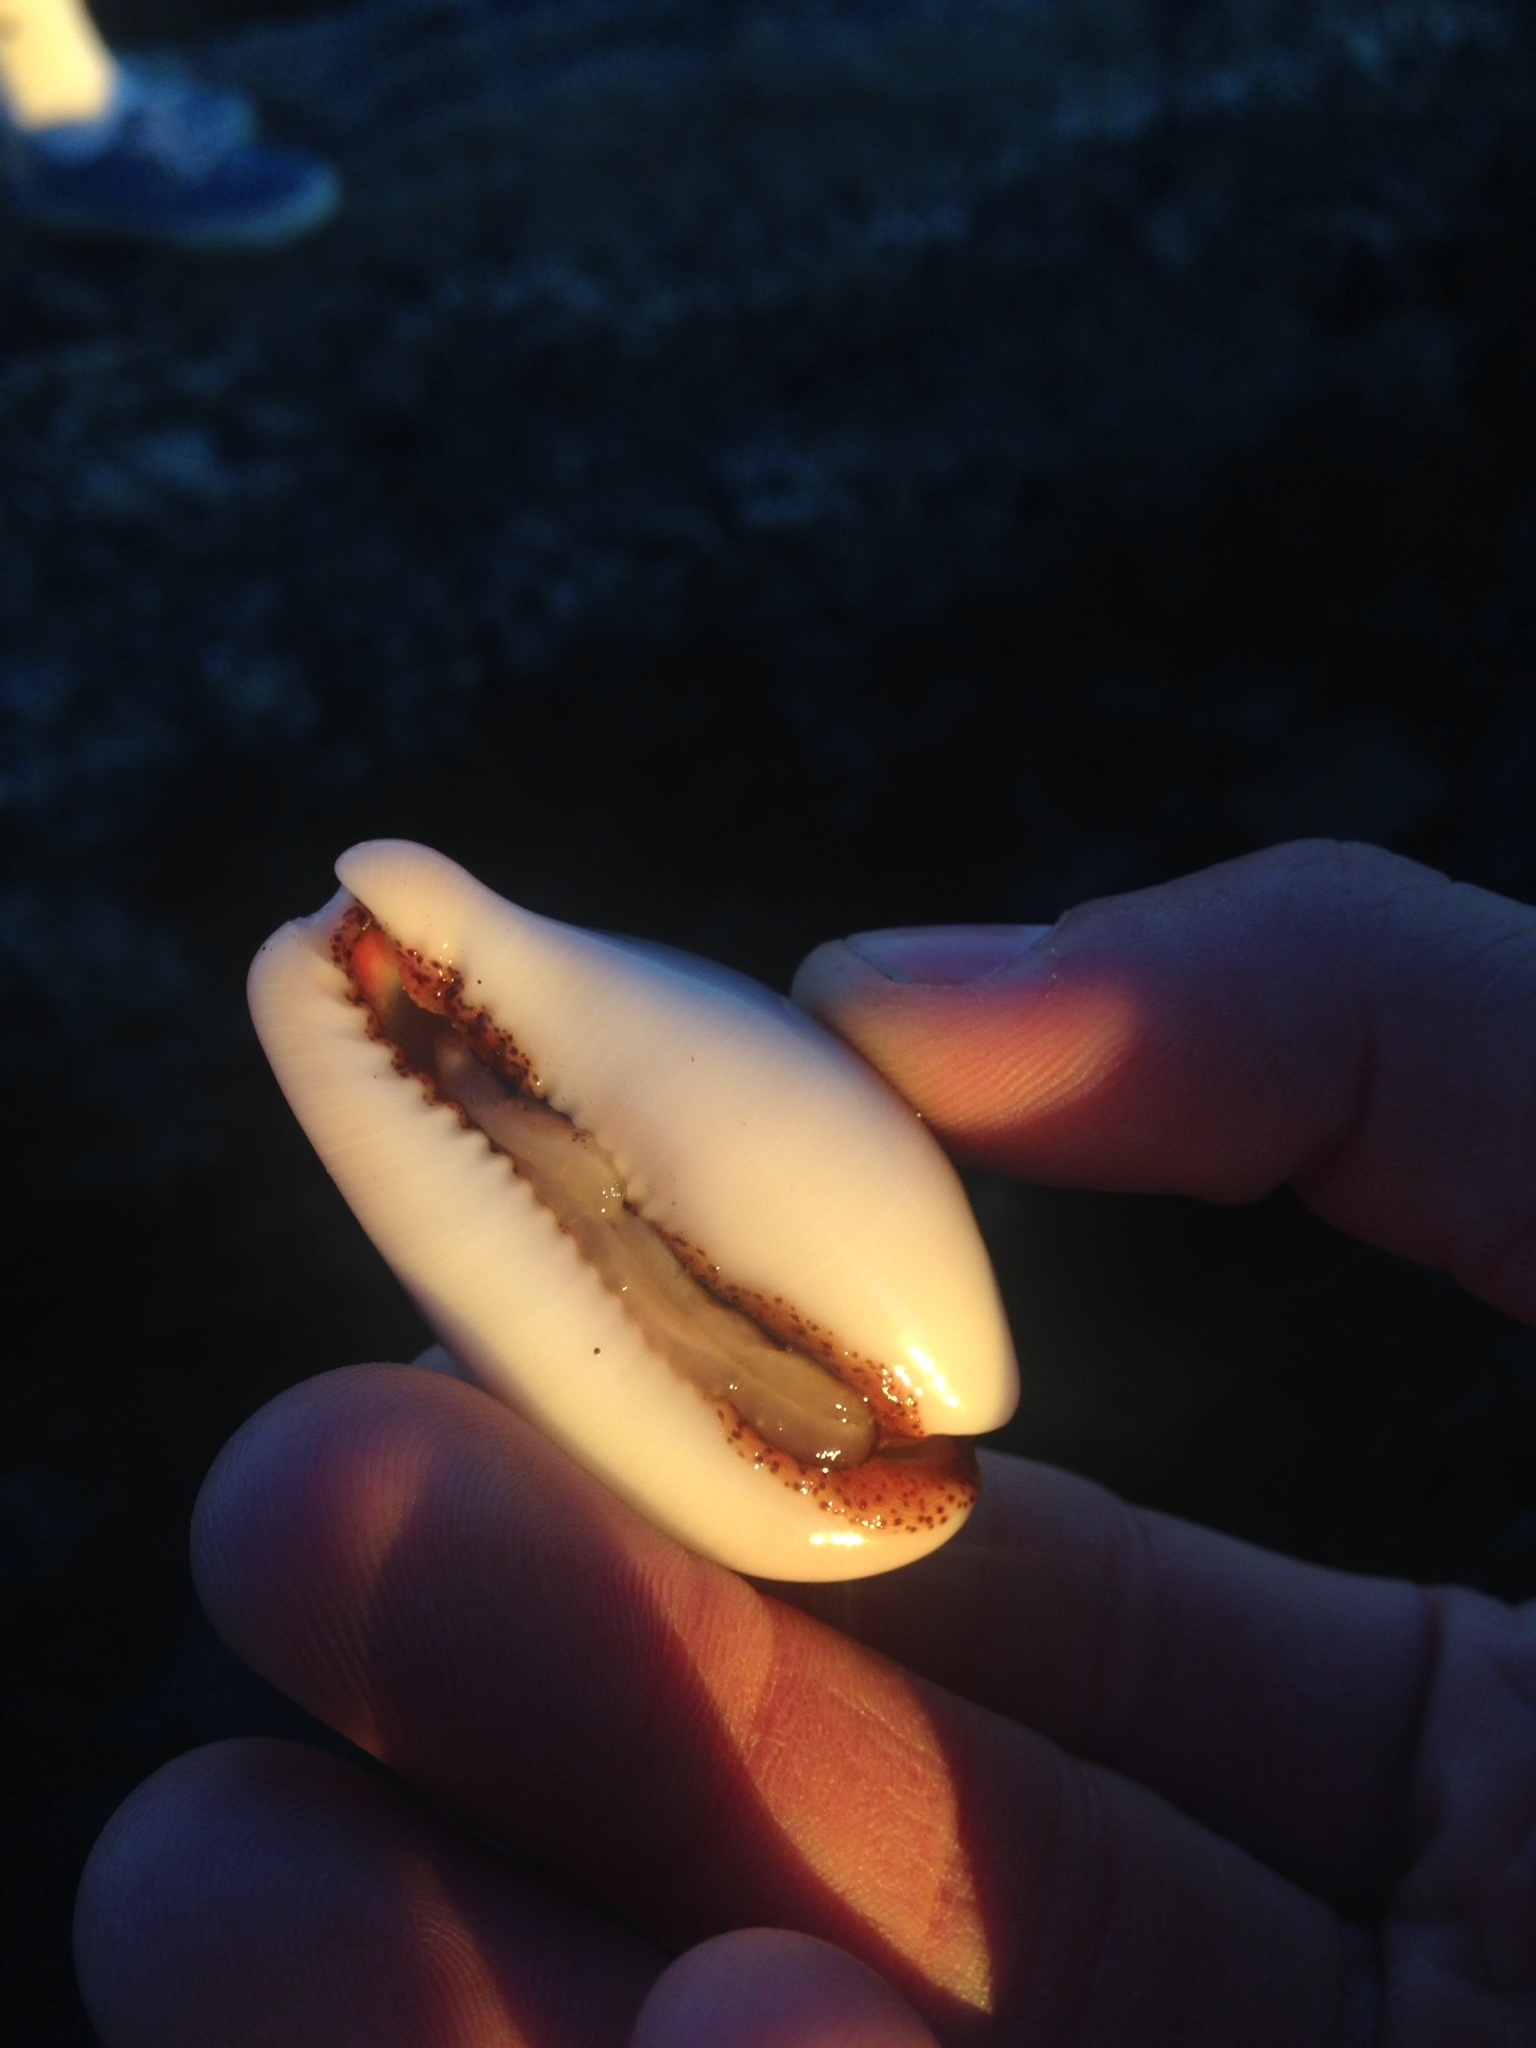 Image of chestnut cowrie